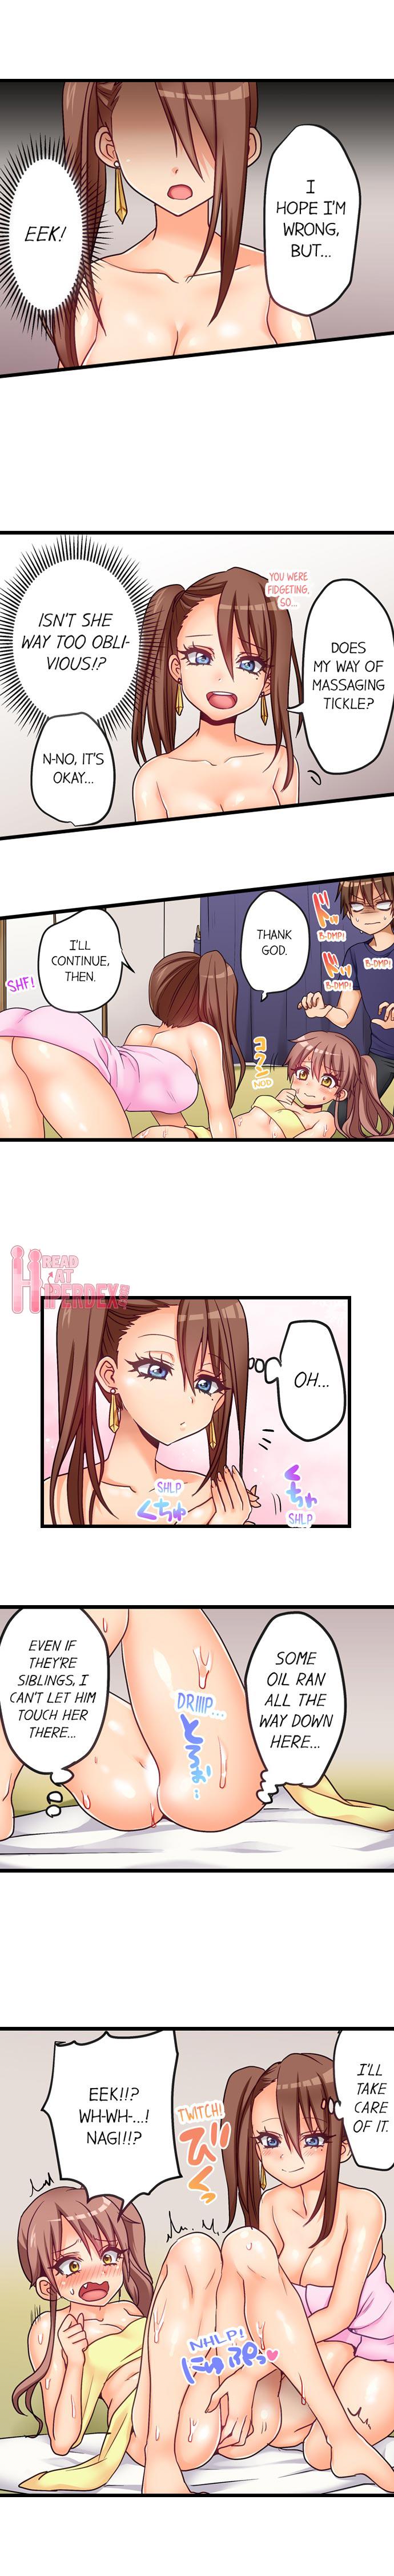 Fuck Porori] My First Time is with.... My Little Sister?! - Original Dominate - Page 5